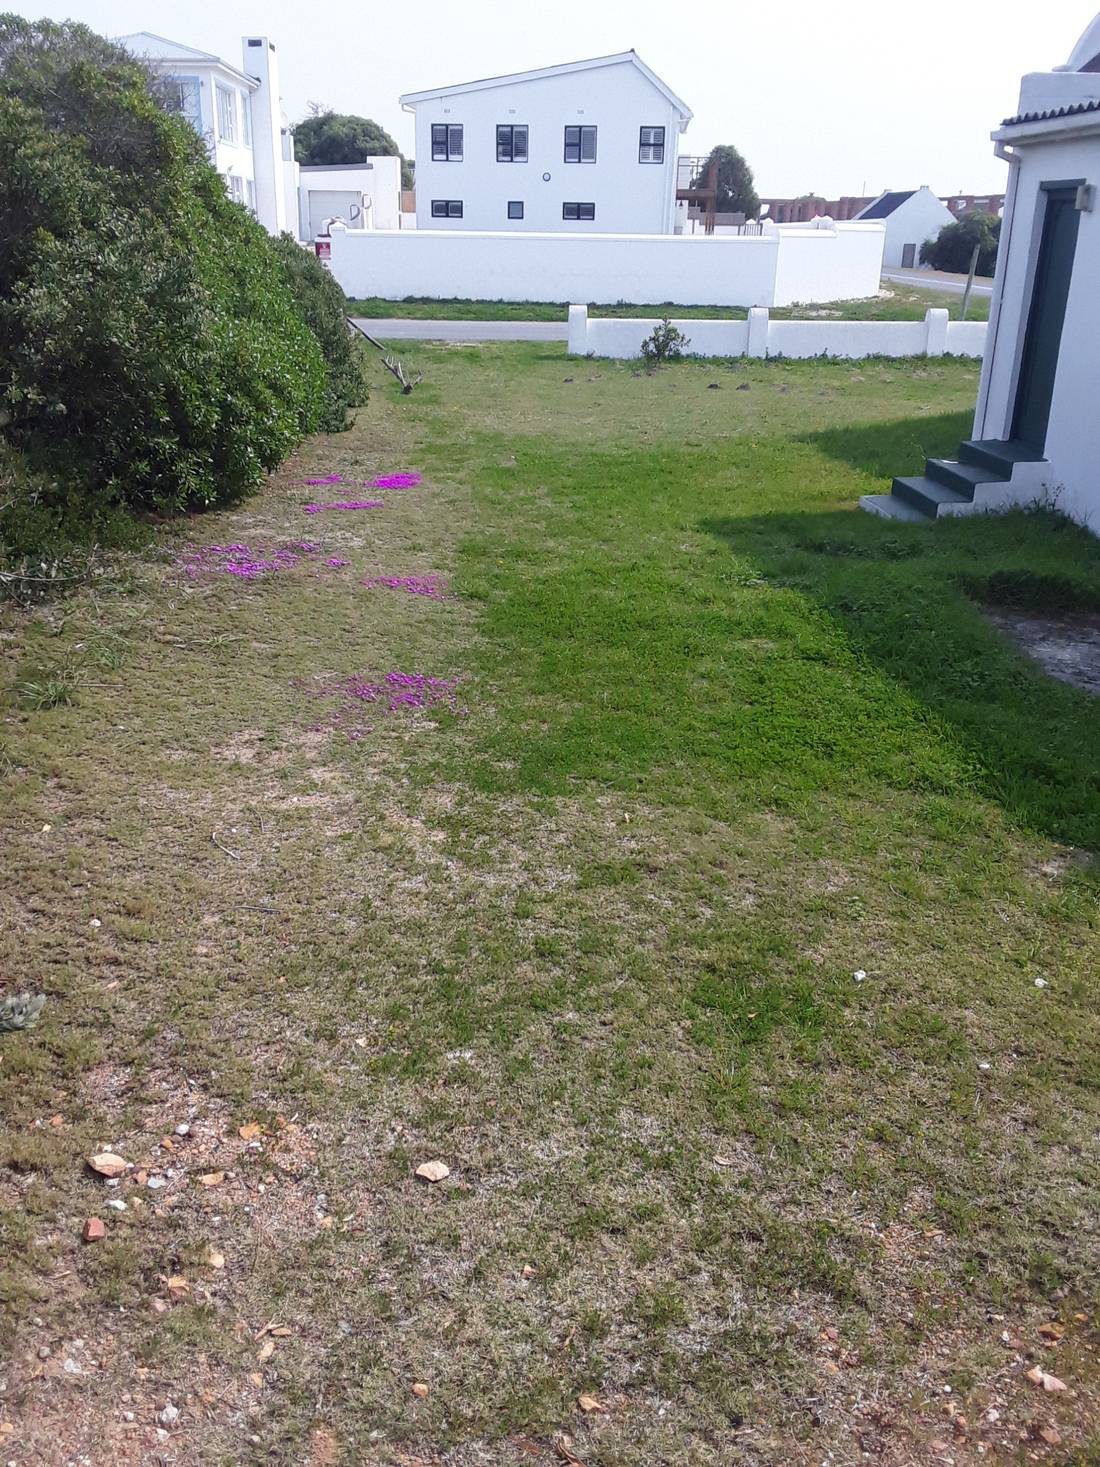 Indigenous pink flowers as ground cover beside the deserted houses and lanes of Arniston village.